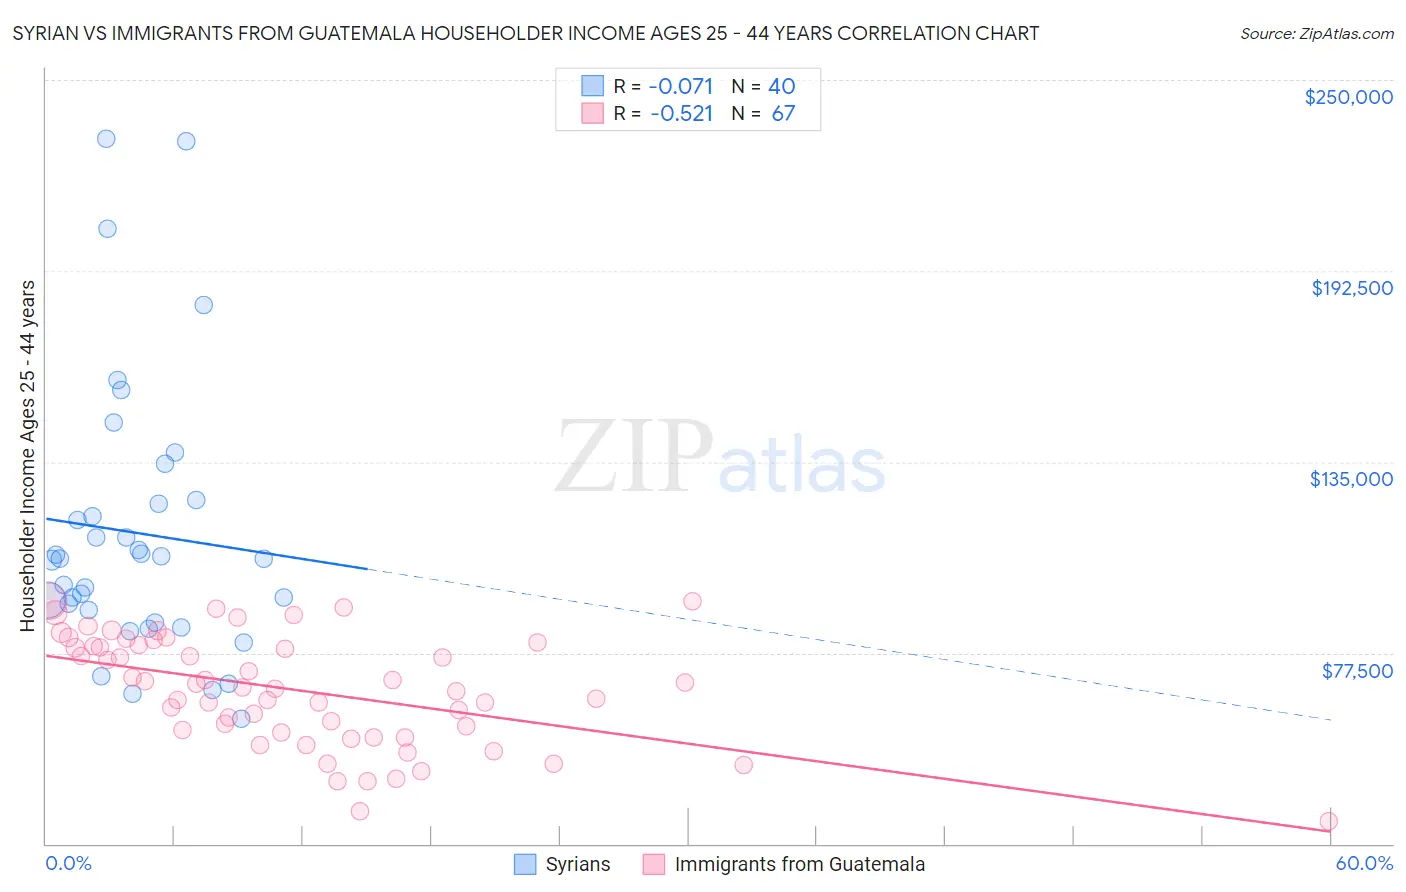 Syrian vs Immigrants from Guatemala Householder Income Ages 25 - 44 years